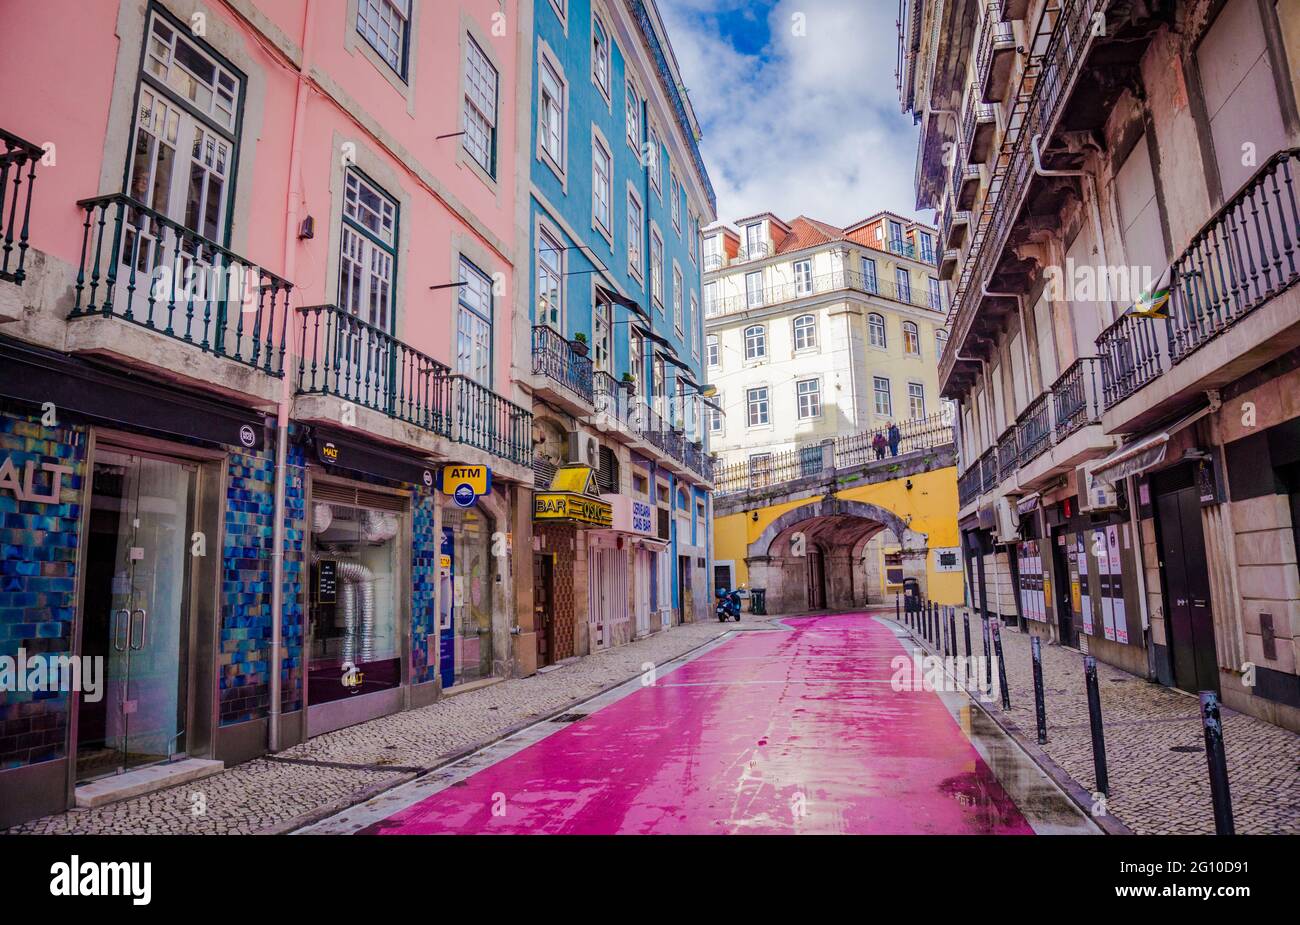 LISBON, PORTUGAL - MARCH 25, 2017: Rua Nova Do Carvalho - Lisbon Pink Street with bars. The Heart Of Lisbon's Night Life in the daytime with no people Stock Photo